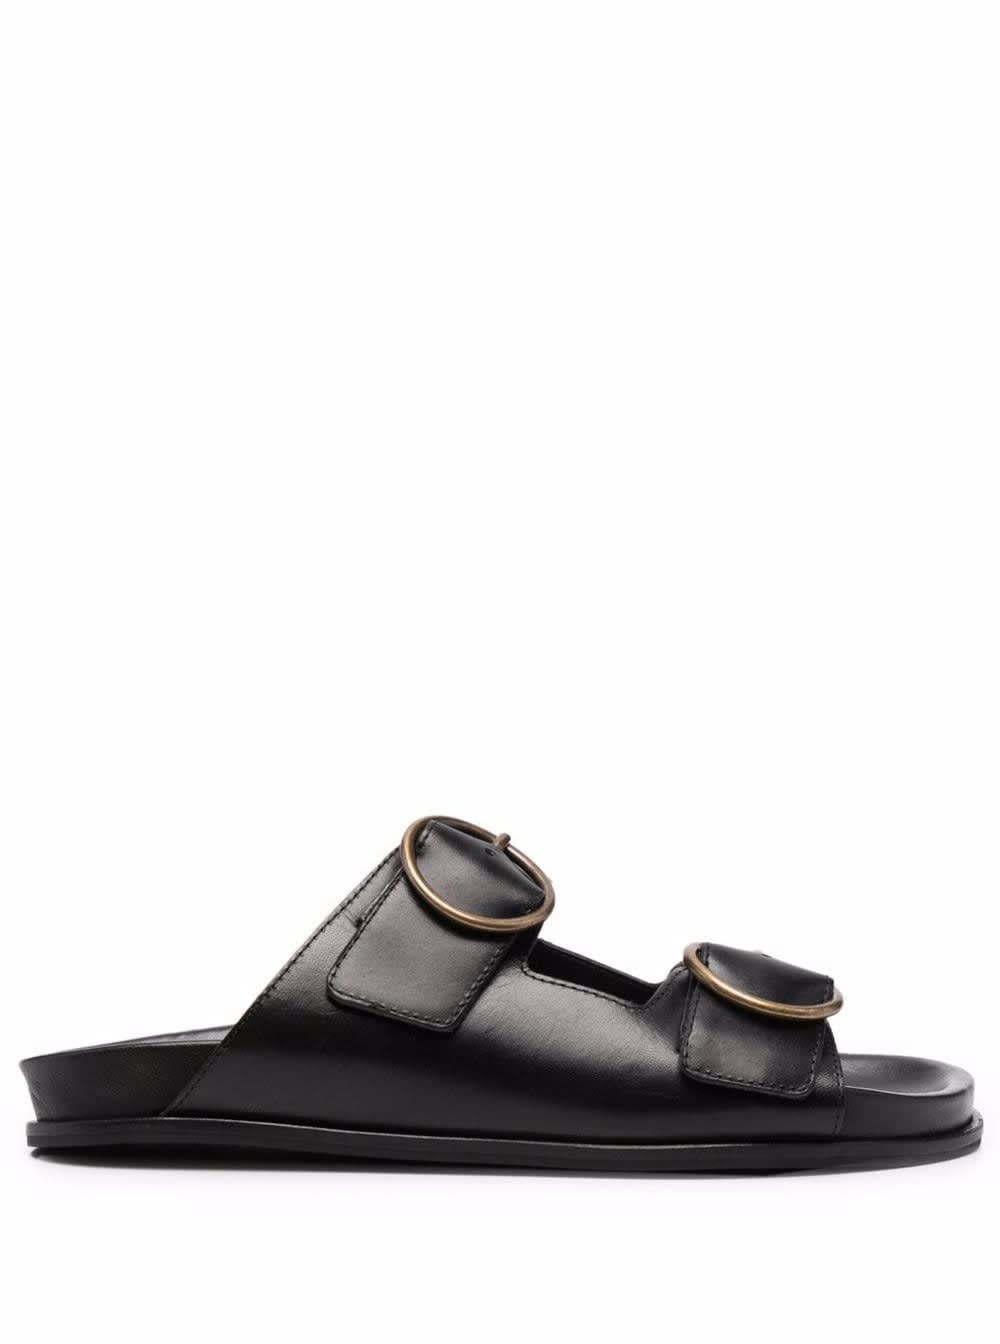 TwinSet Twin Set Womans Black Leather Slide Sandals With Buckles